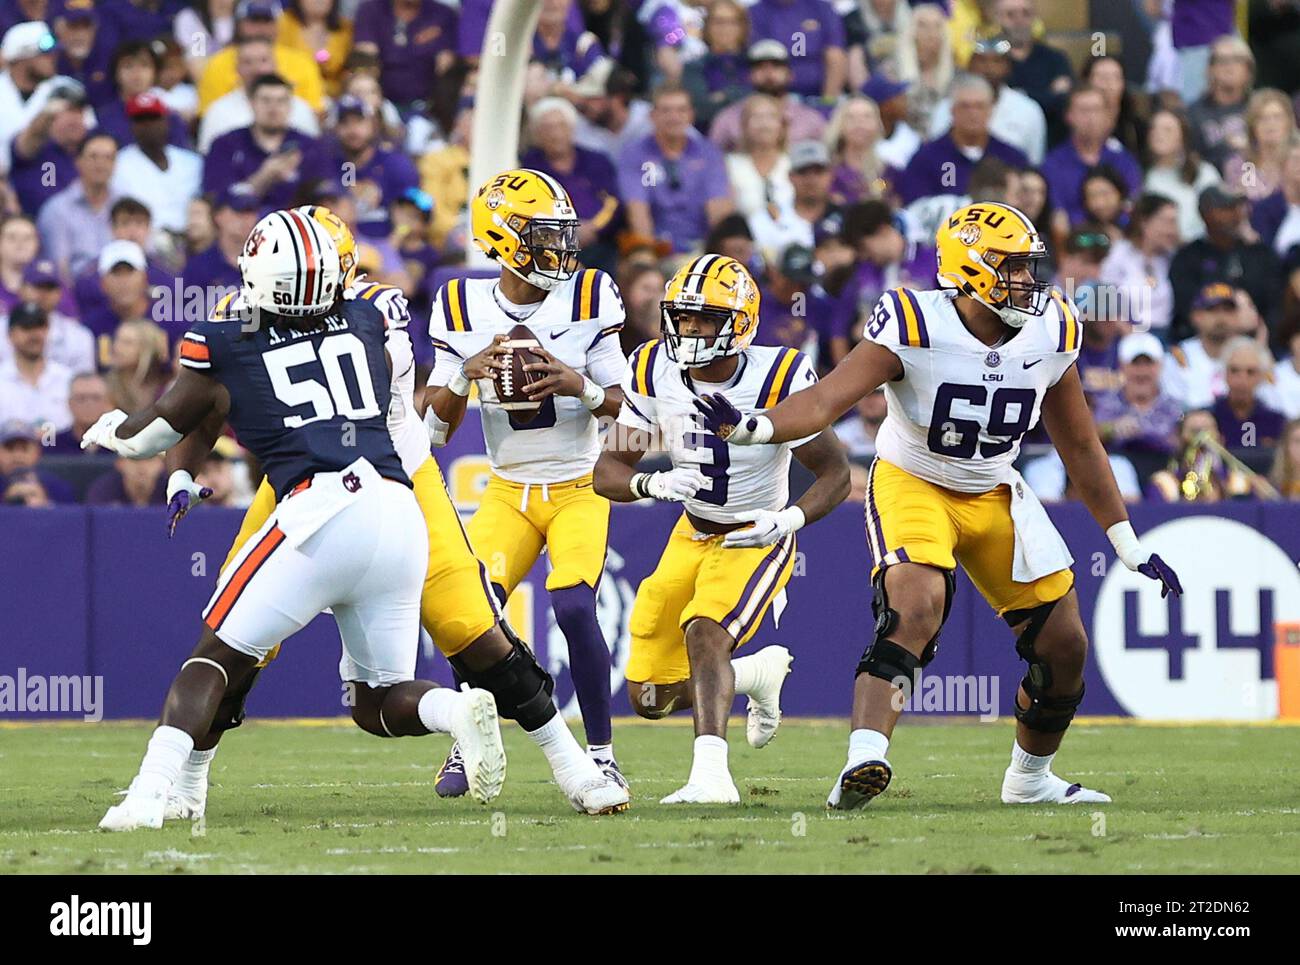 Lsu Tigers Quarterback Jayden Daniels Looks Downfield For An Open Receiver While Lsu Tigers